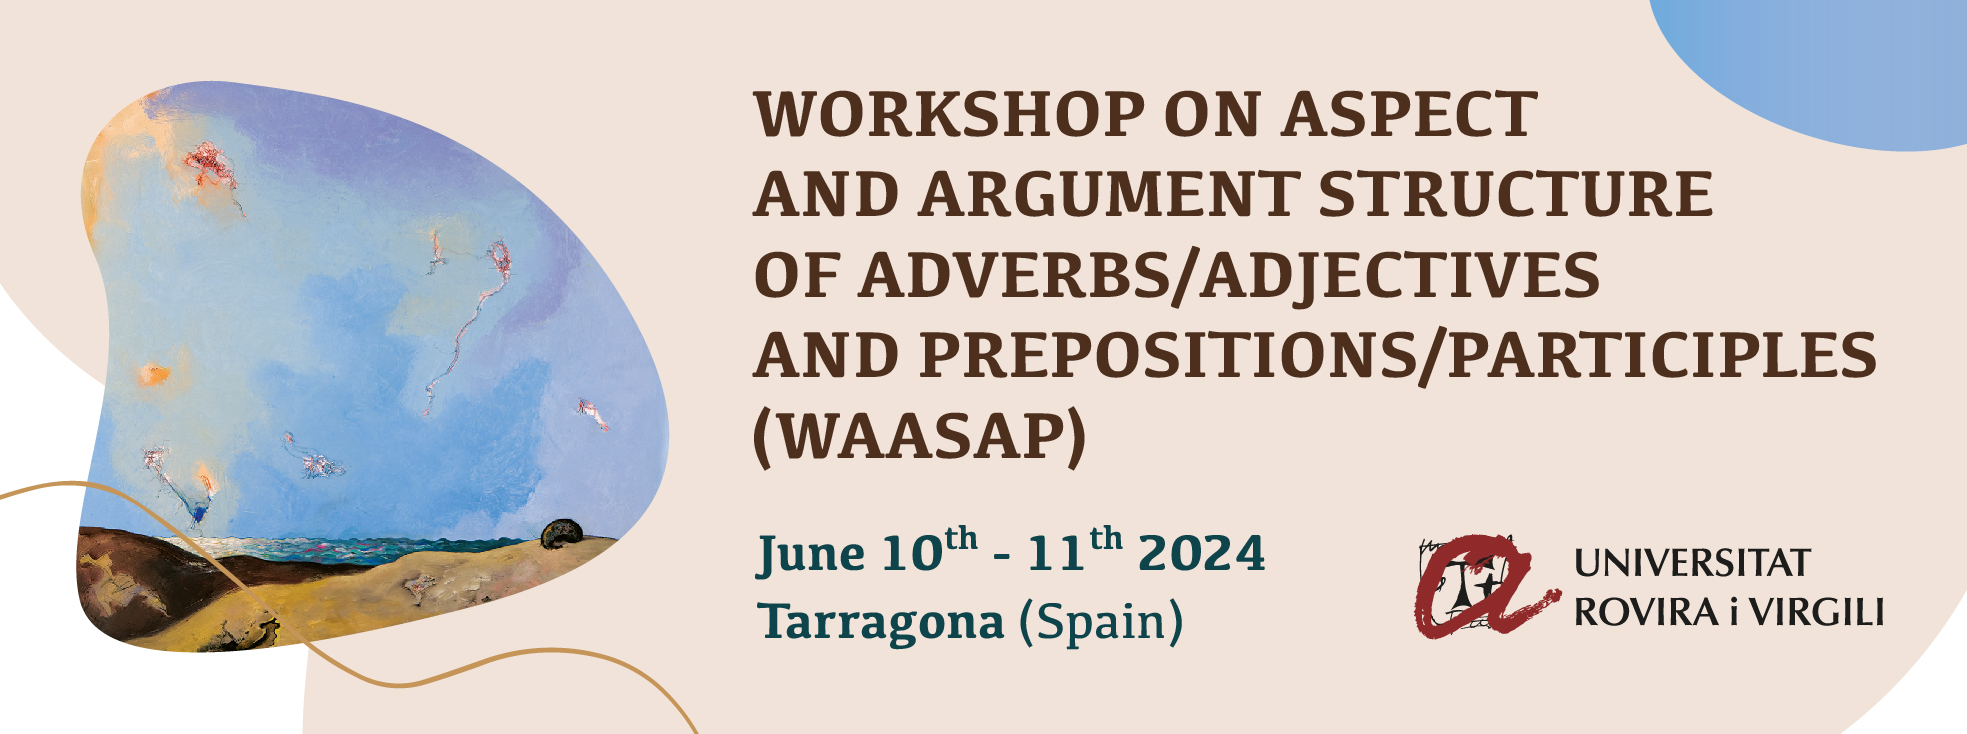 Workshop on Aspect and Argument Structure of Adverbs/Adjectives and Prepositions/Participles (WAASAP)